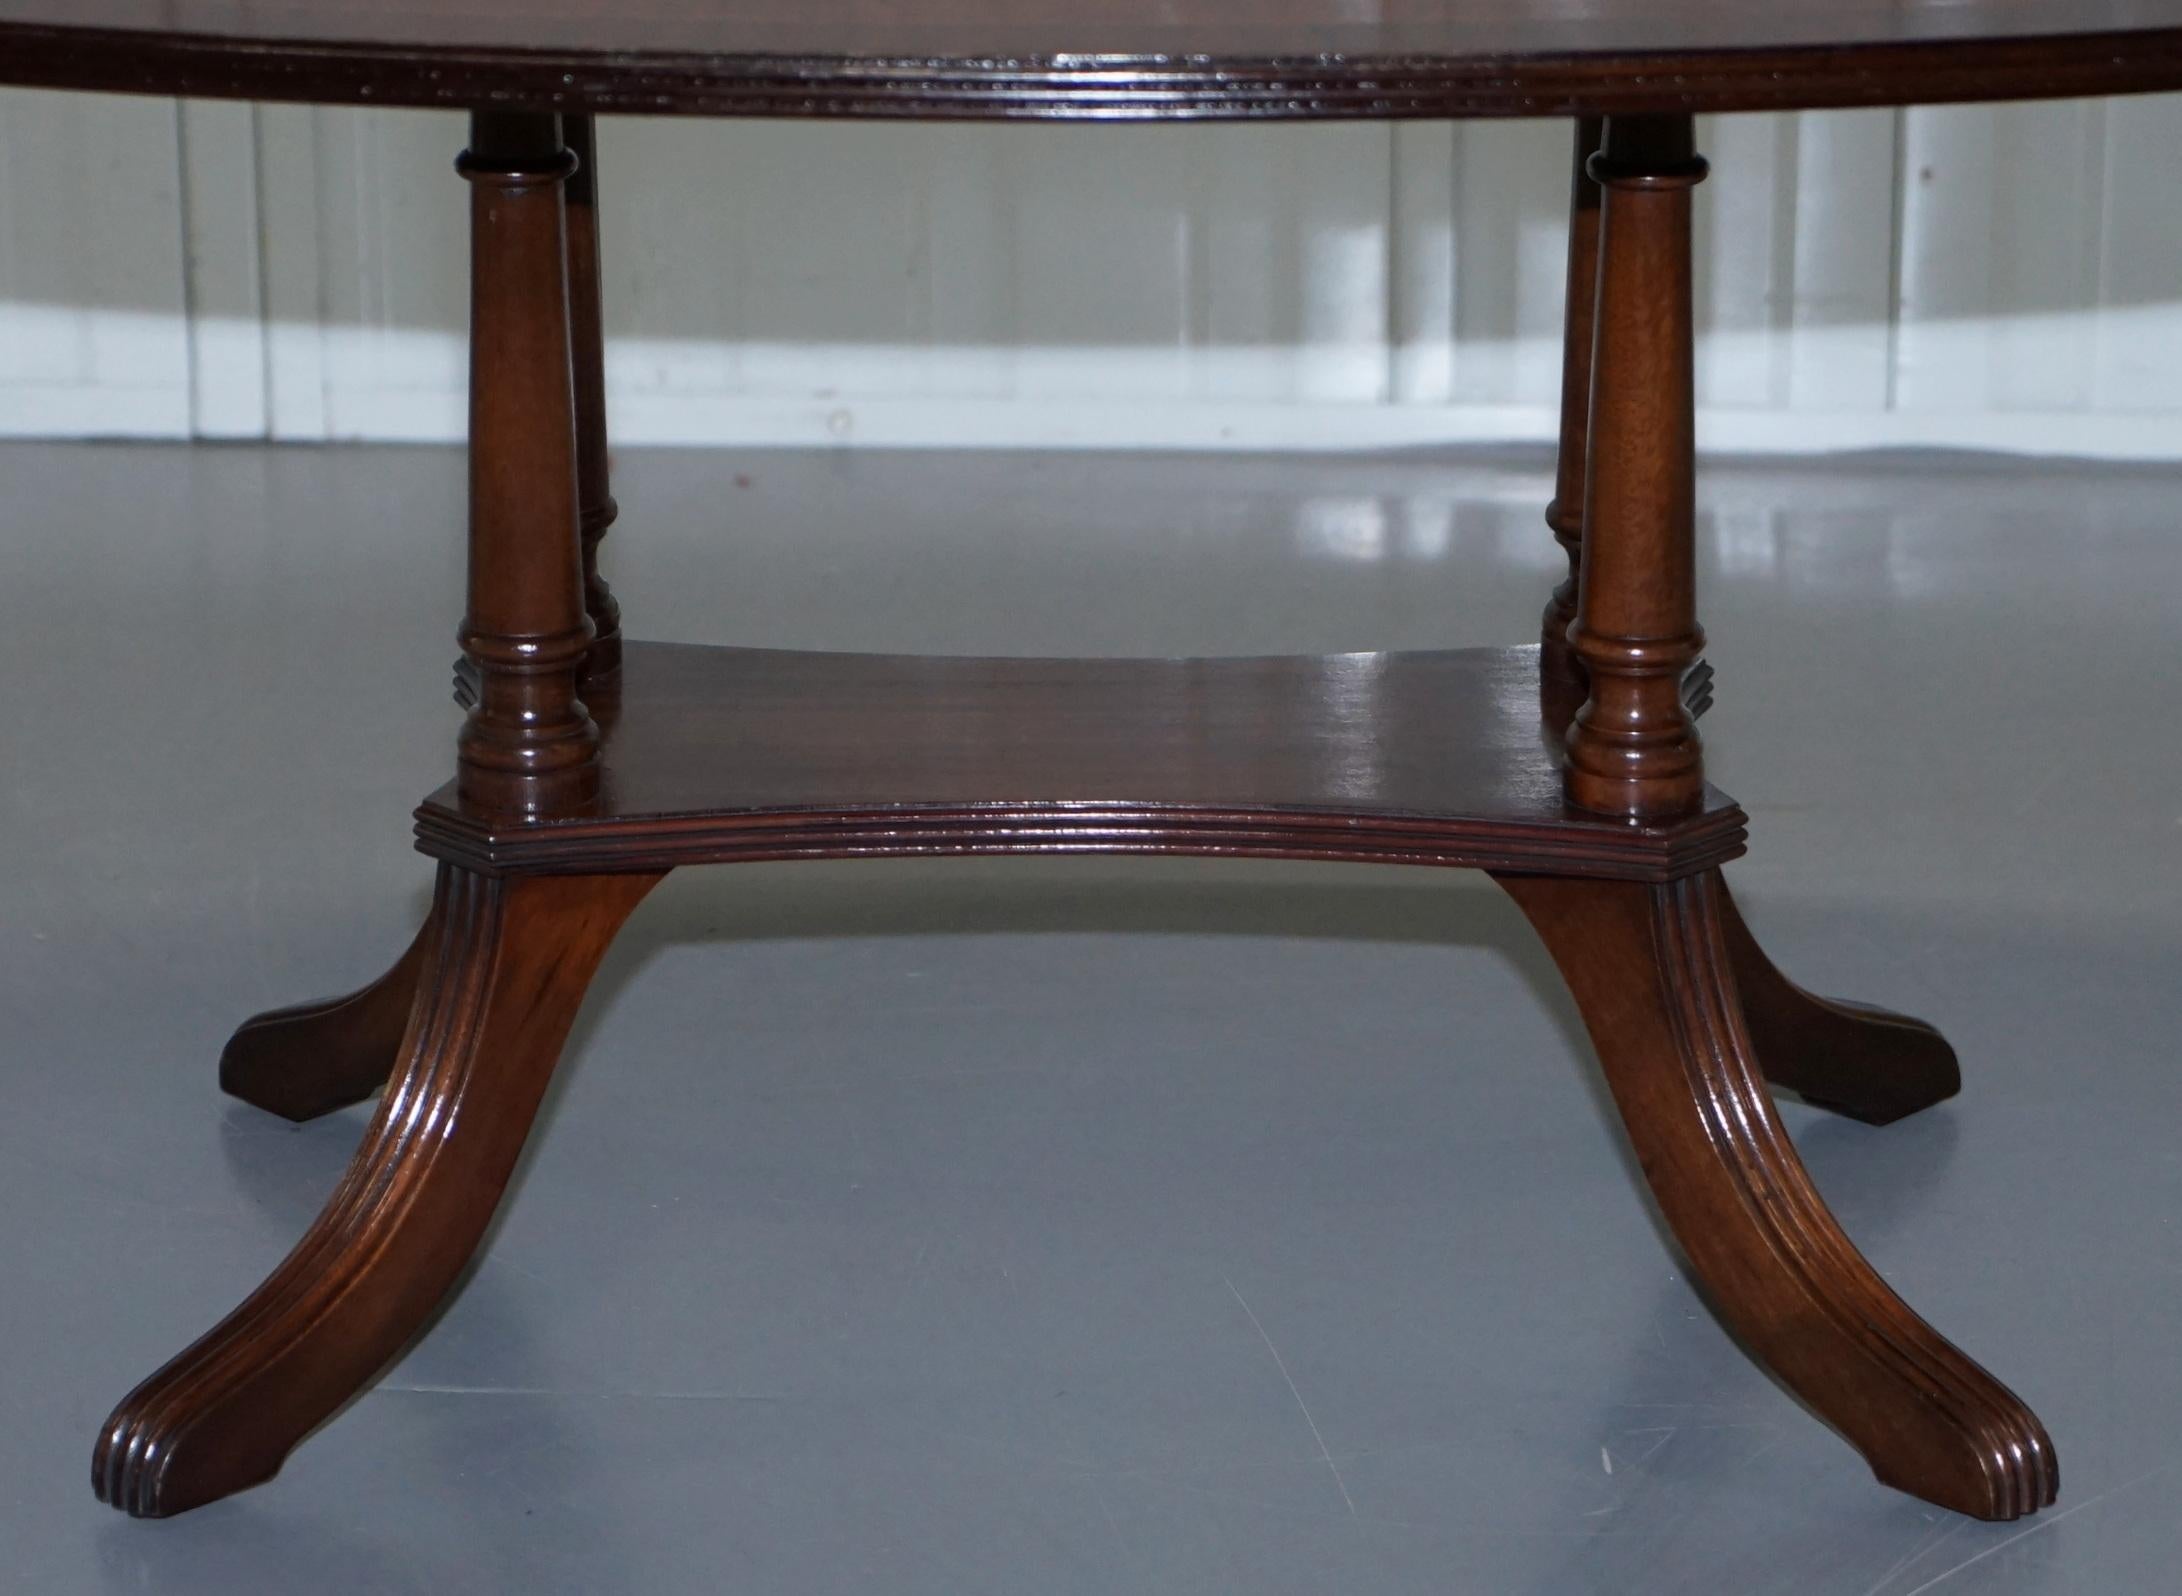 20th Century Lovely Pillared Leg Vintage Mahogany Oval Coffee or Cocktail Table Nice Vintage